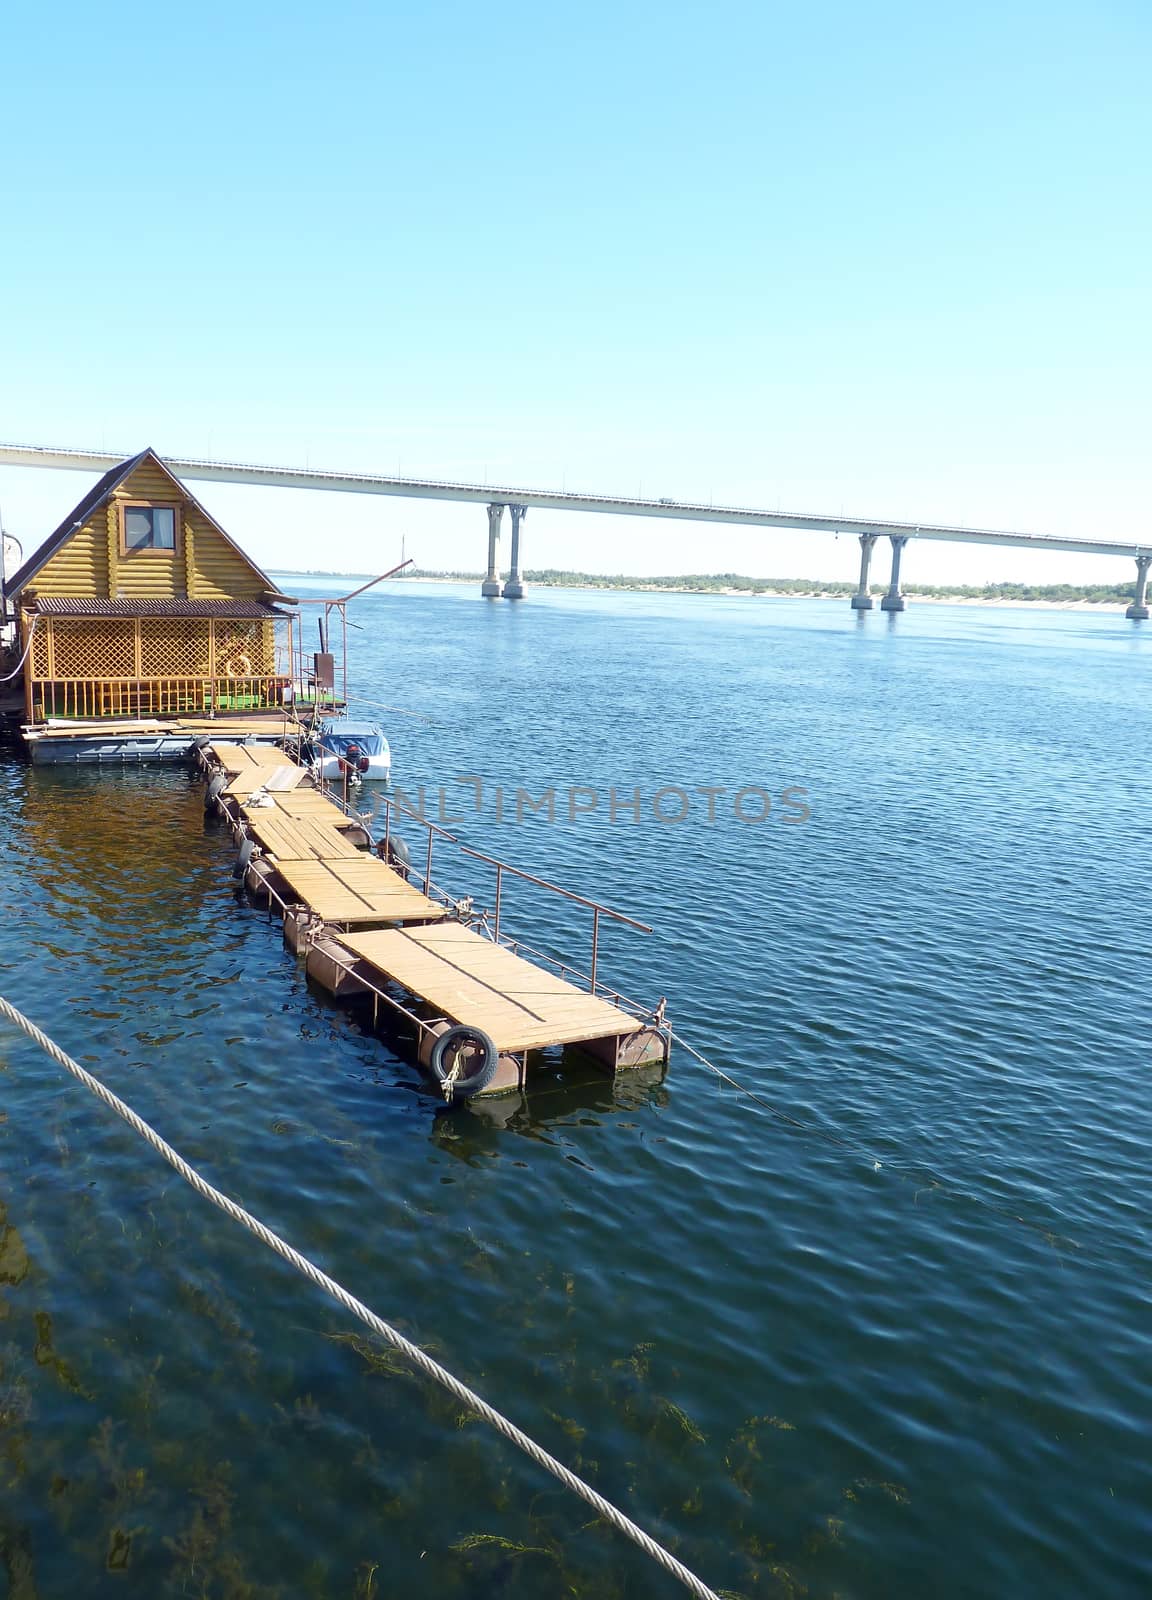 Floating wooden bath on the Volga River in the city of Volgograd